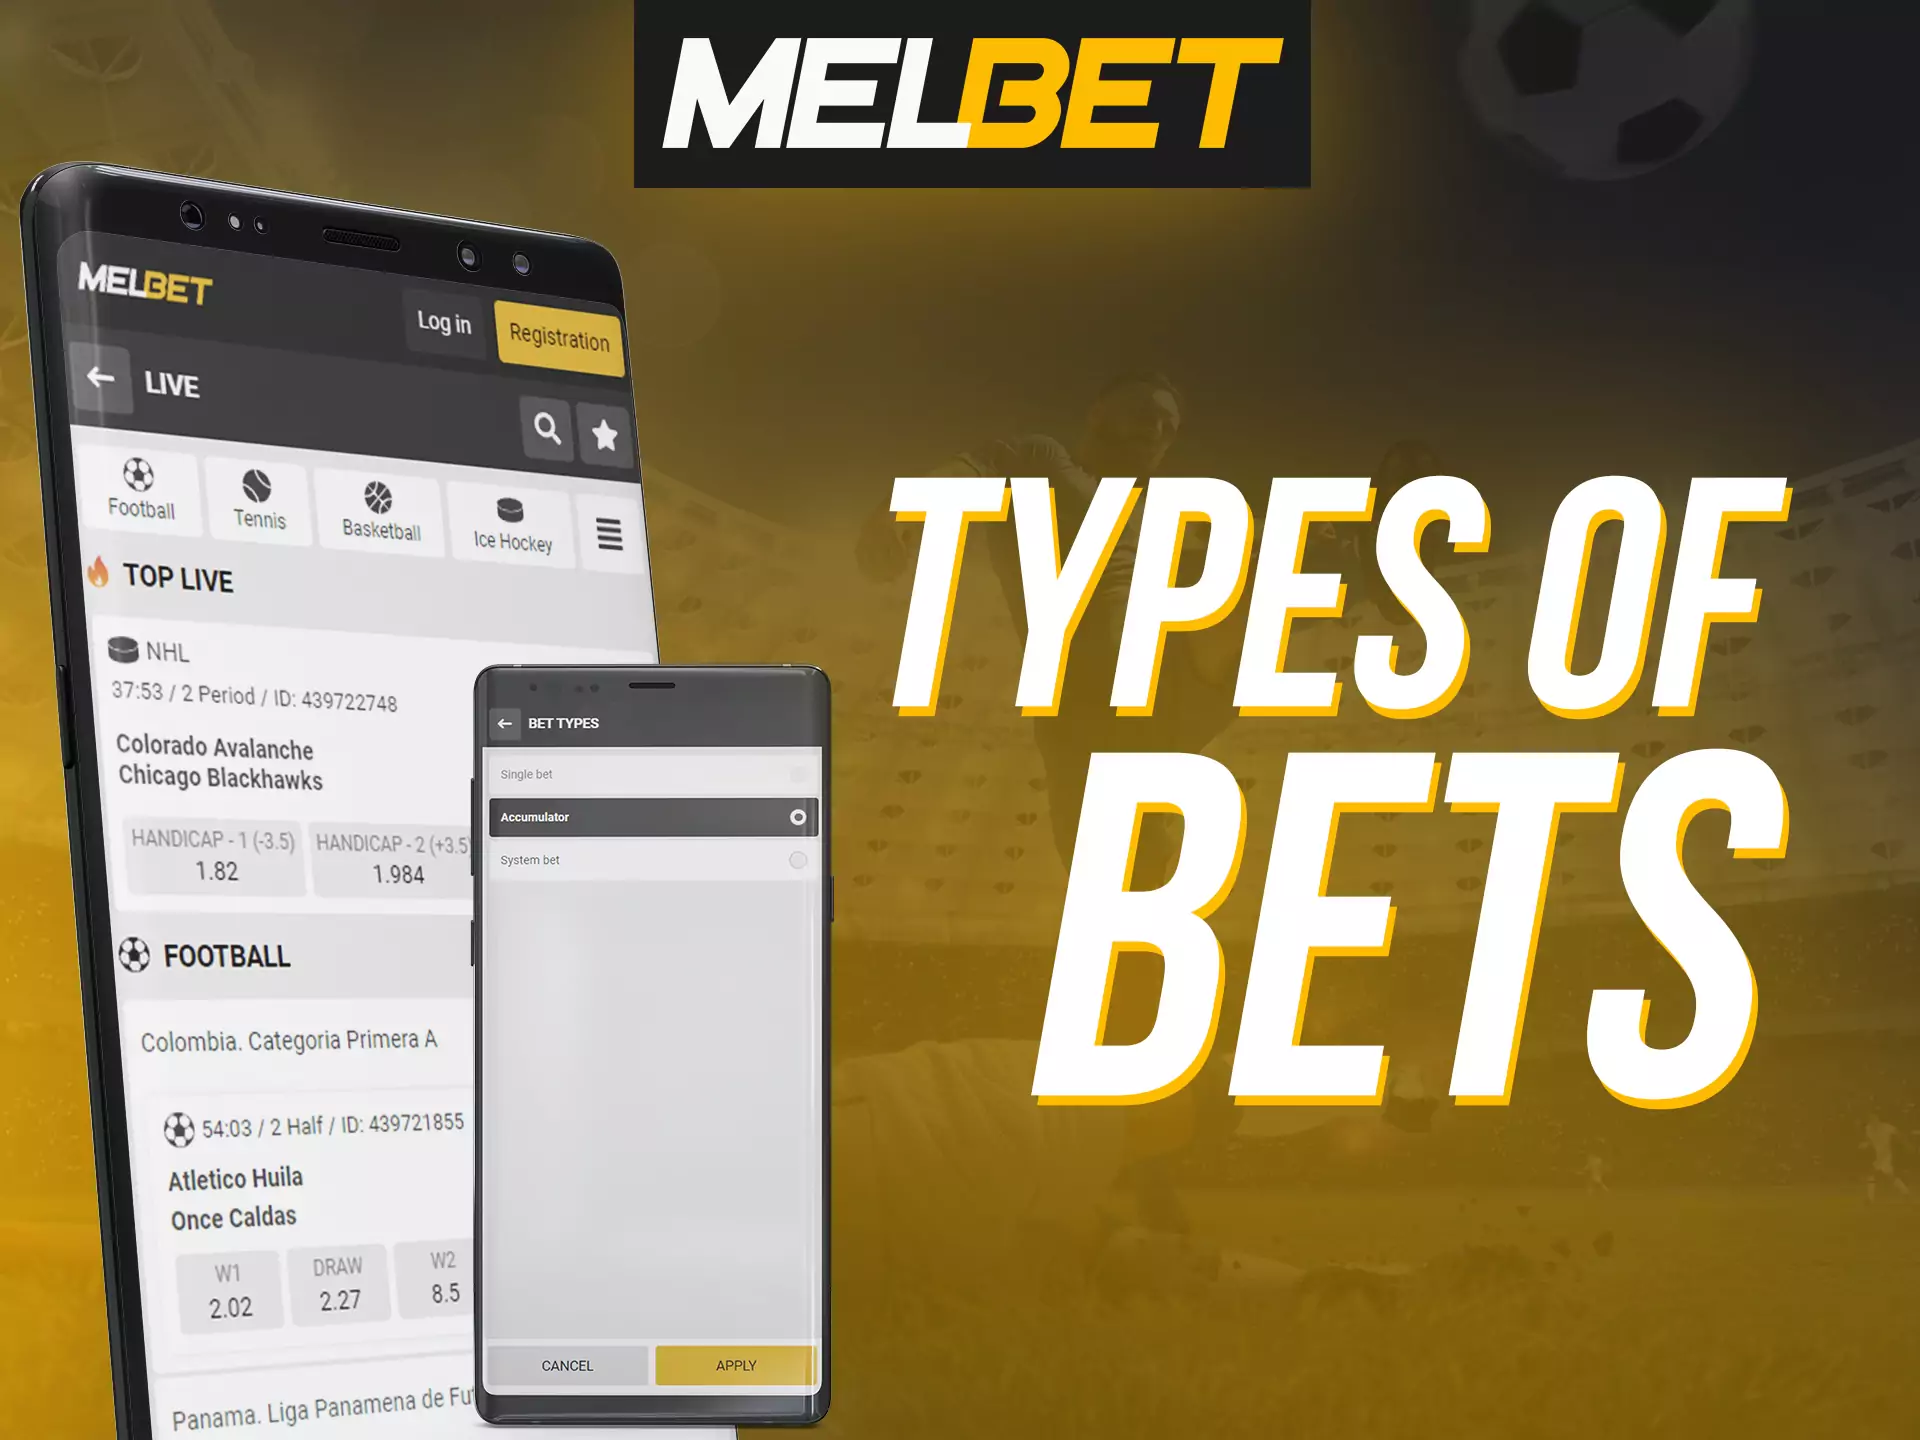 In the Melbet app you can use different types of bets.